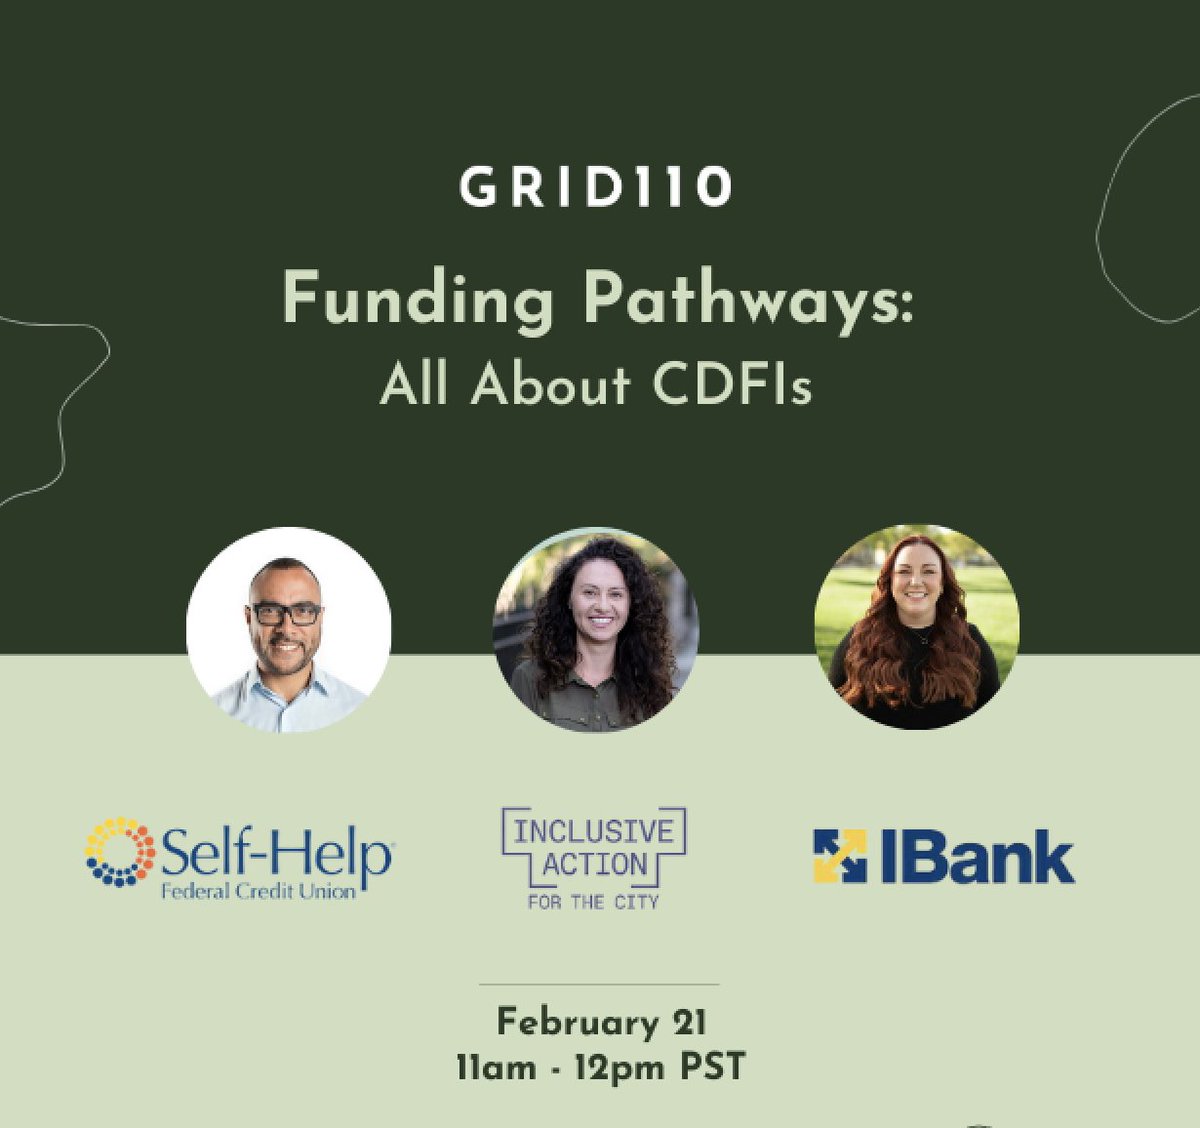 Join @GRID110 for their Funding Pathways panel to learn all about CDFIs! Hear from experts Todd Cooley of @SelfHelpFedCU, Andrea Avila of @InclusivAction for the City, and Megan Hodapp of @IBankCA, and get all your questions answered. Register: bit.ly/49fG57Q